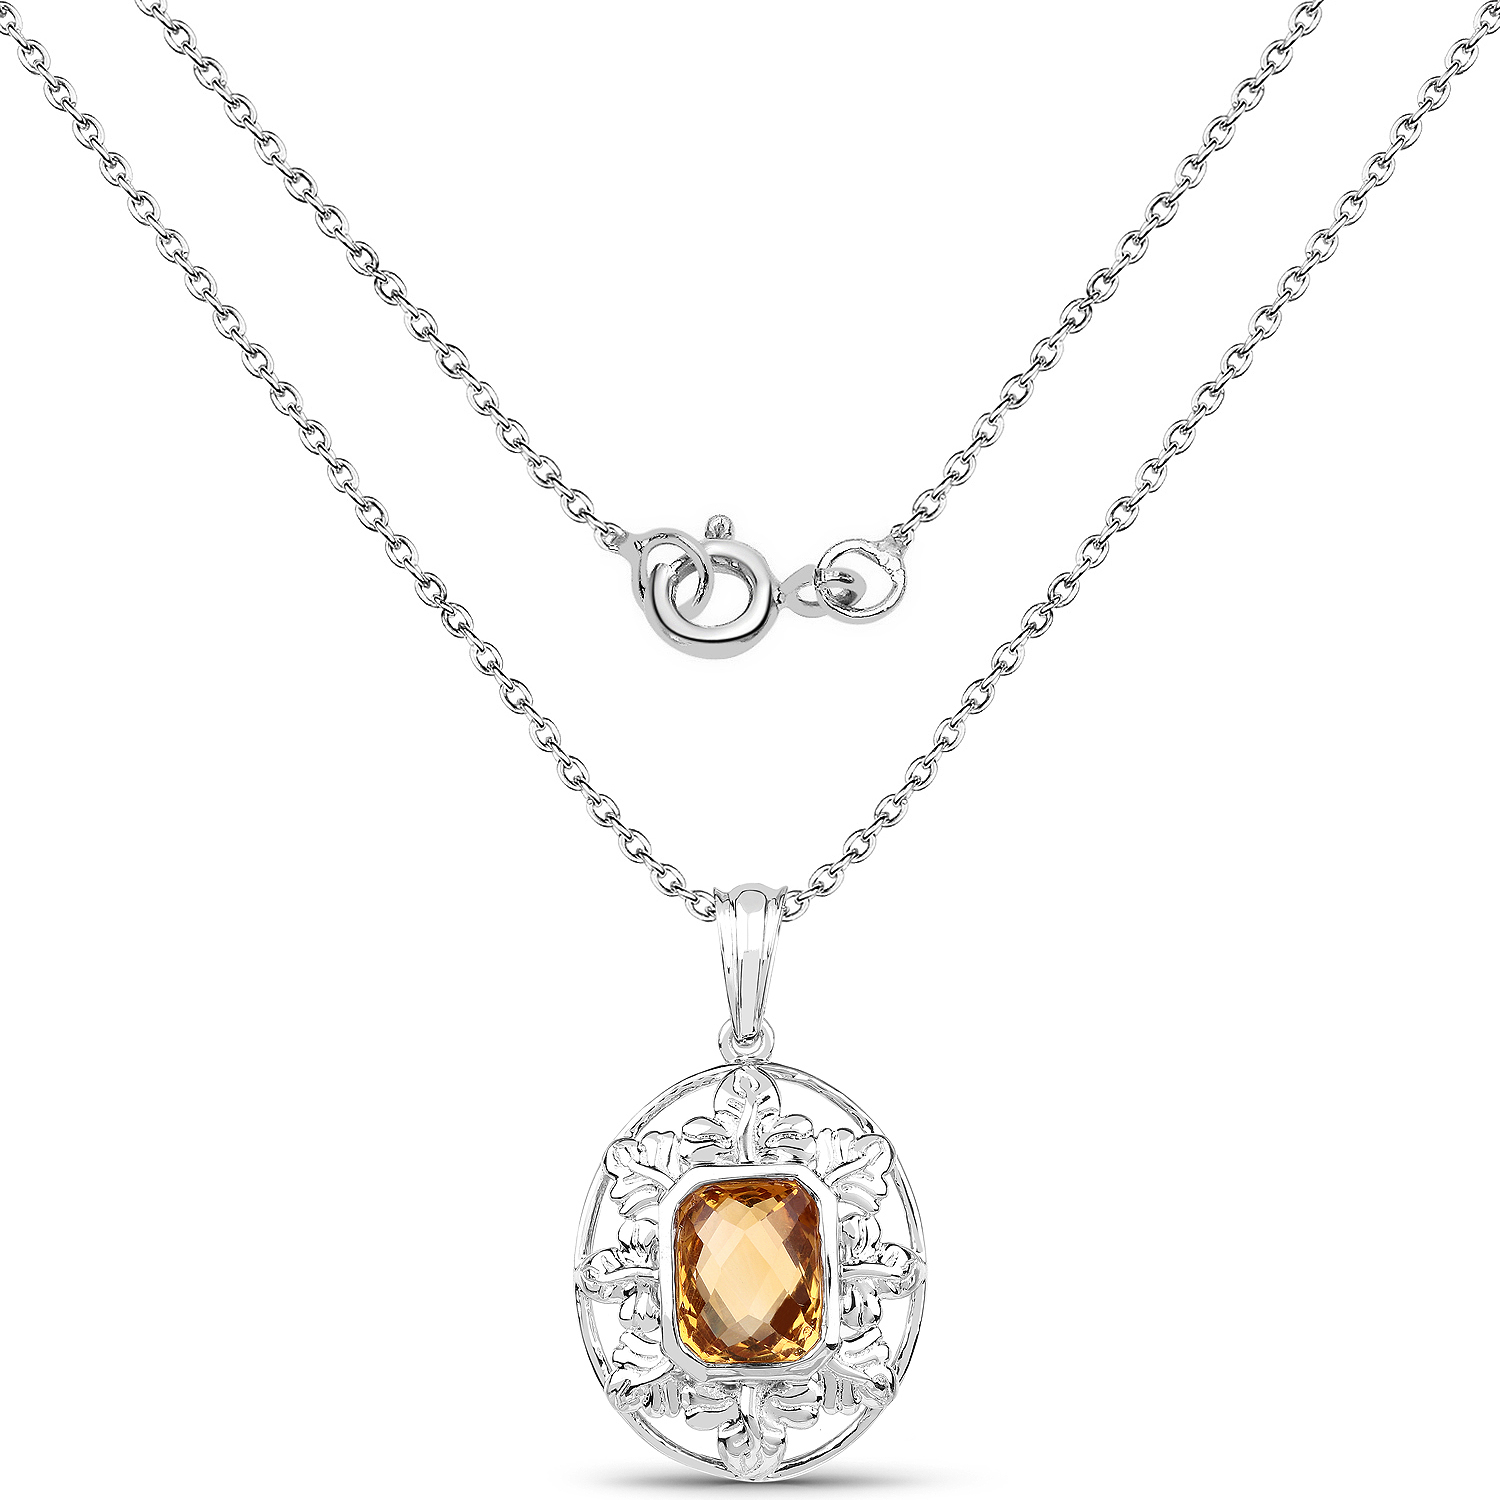 Details about  / Tourmaline Citrine 925 Sterling Silver Jewelry Necklace 18/"  GP-3211-3220